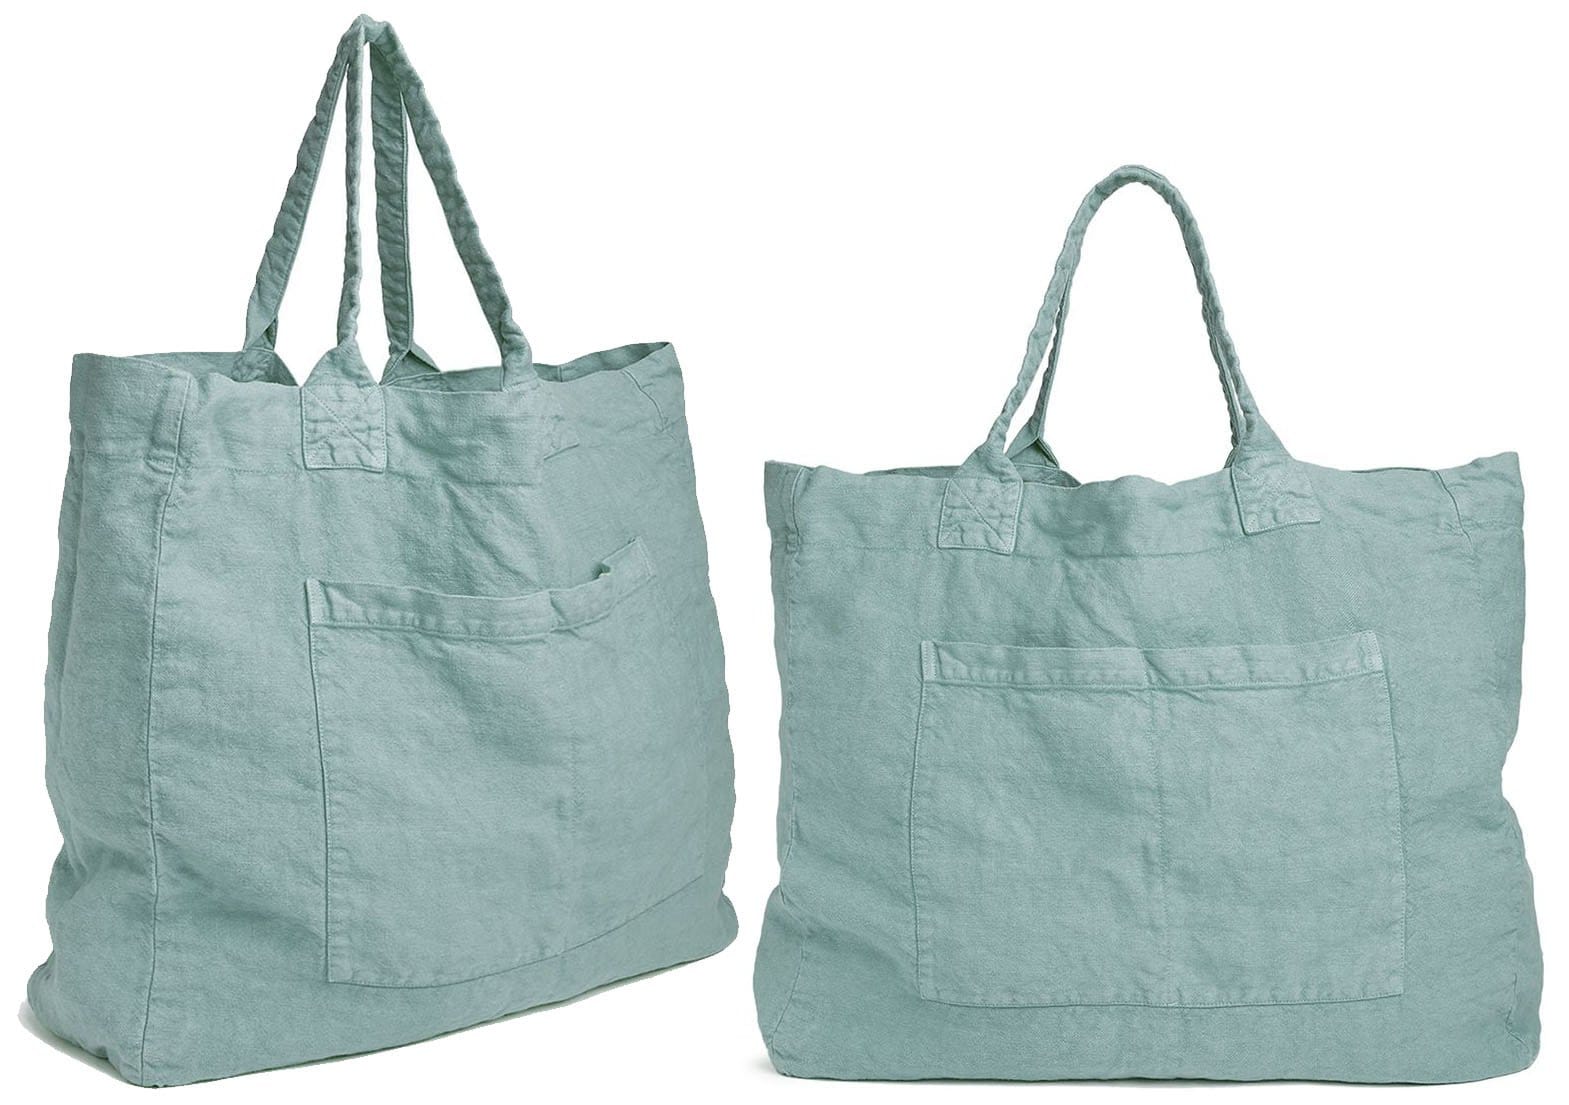 Once Milano's weekend bag is an eco-friendly bag made of lightweight linen